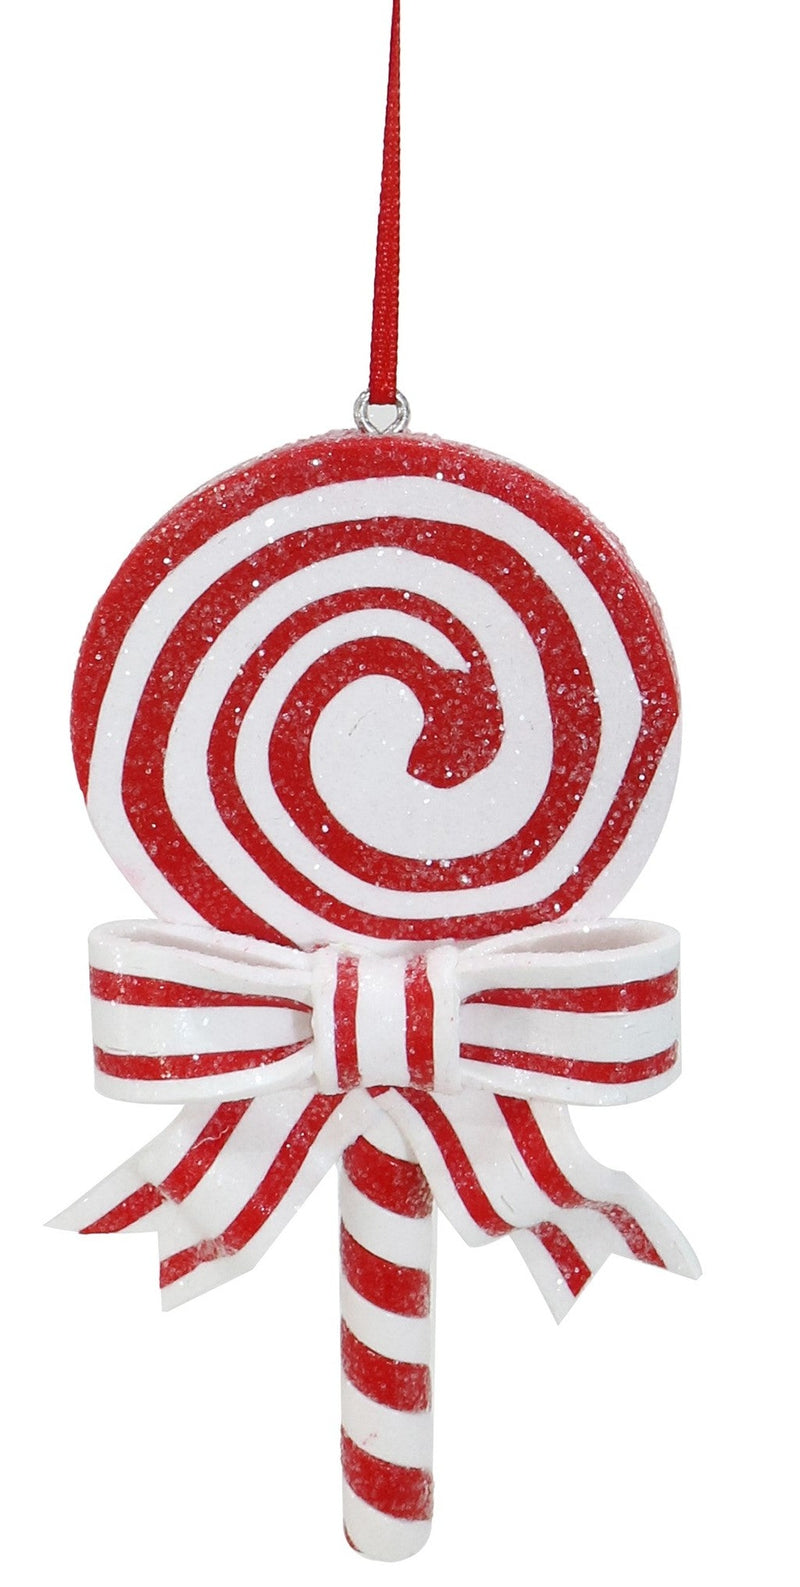 COMING SOON - HANGING CANDY CANE LOLLIPOP